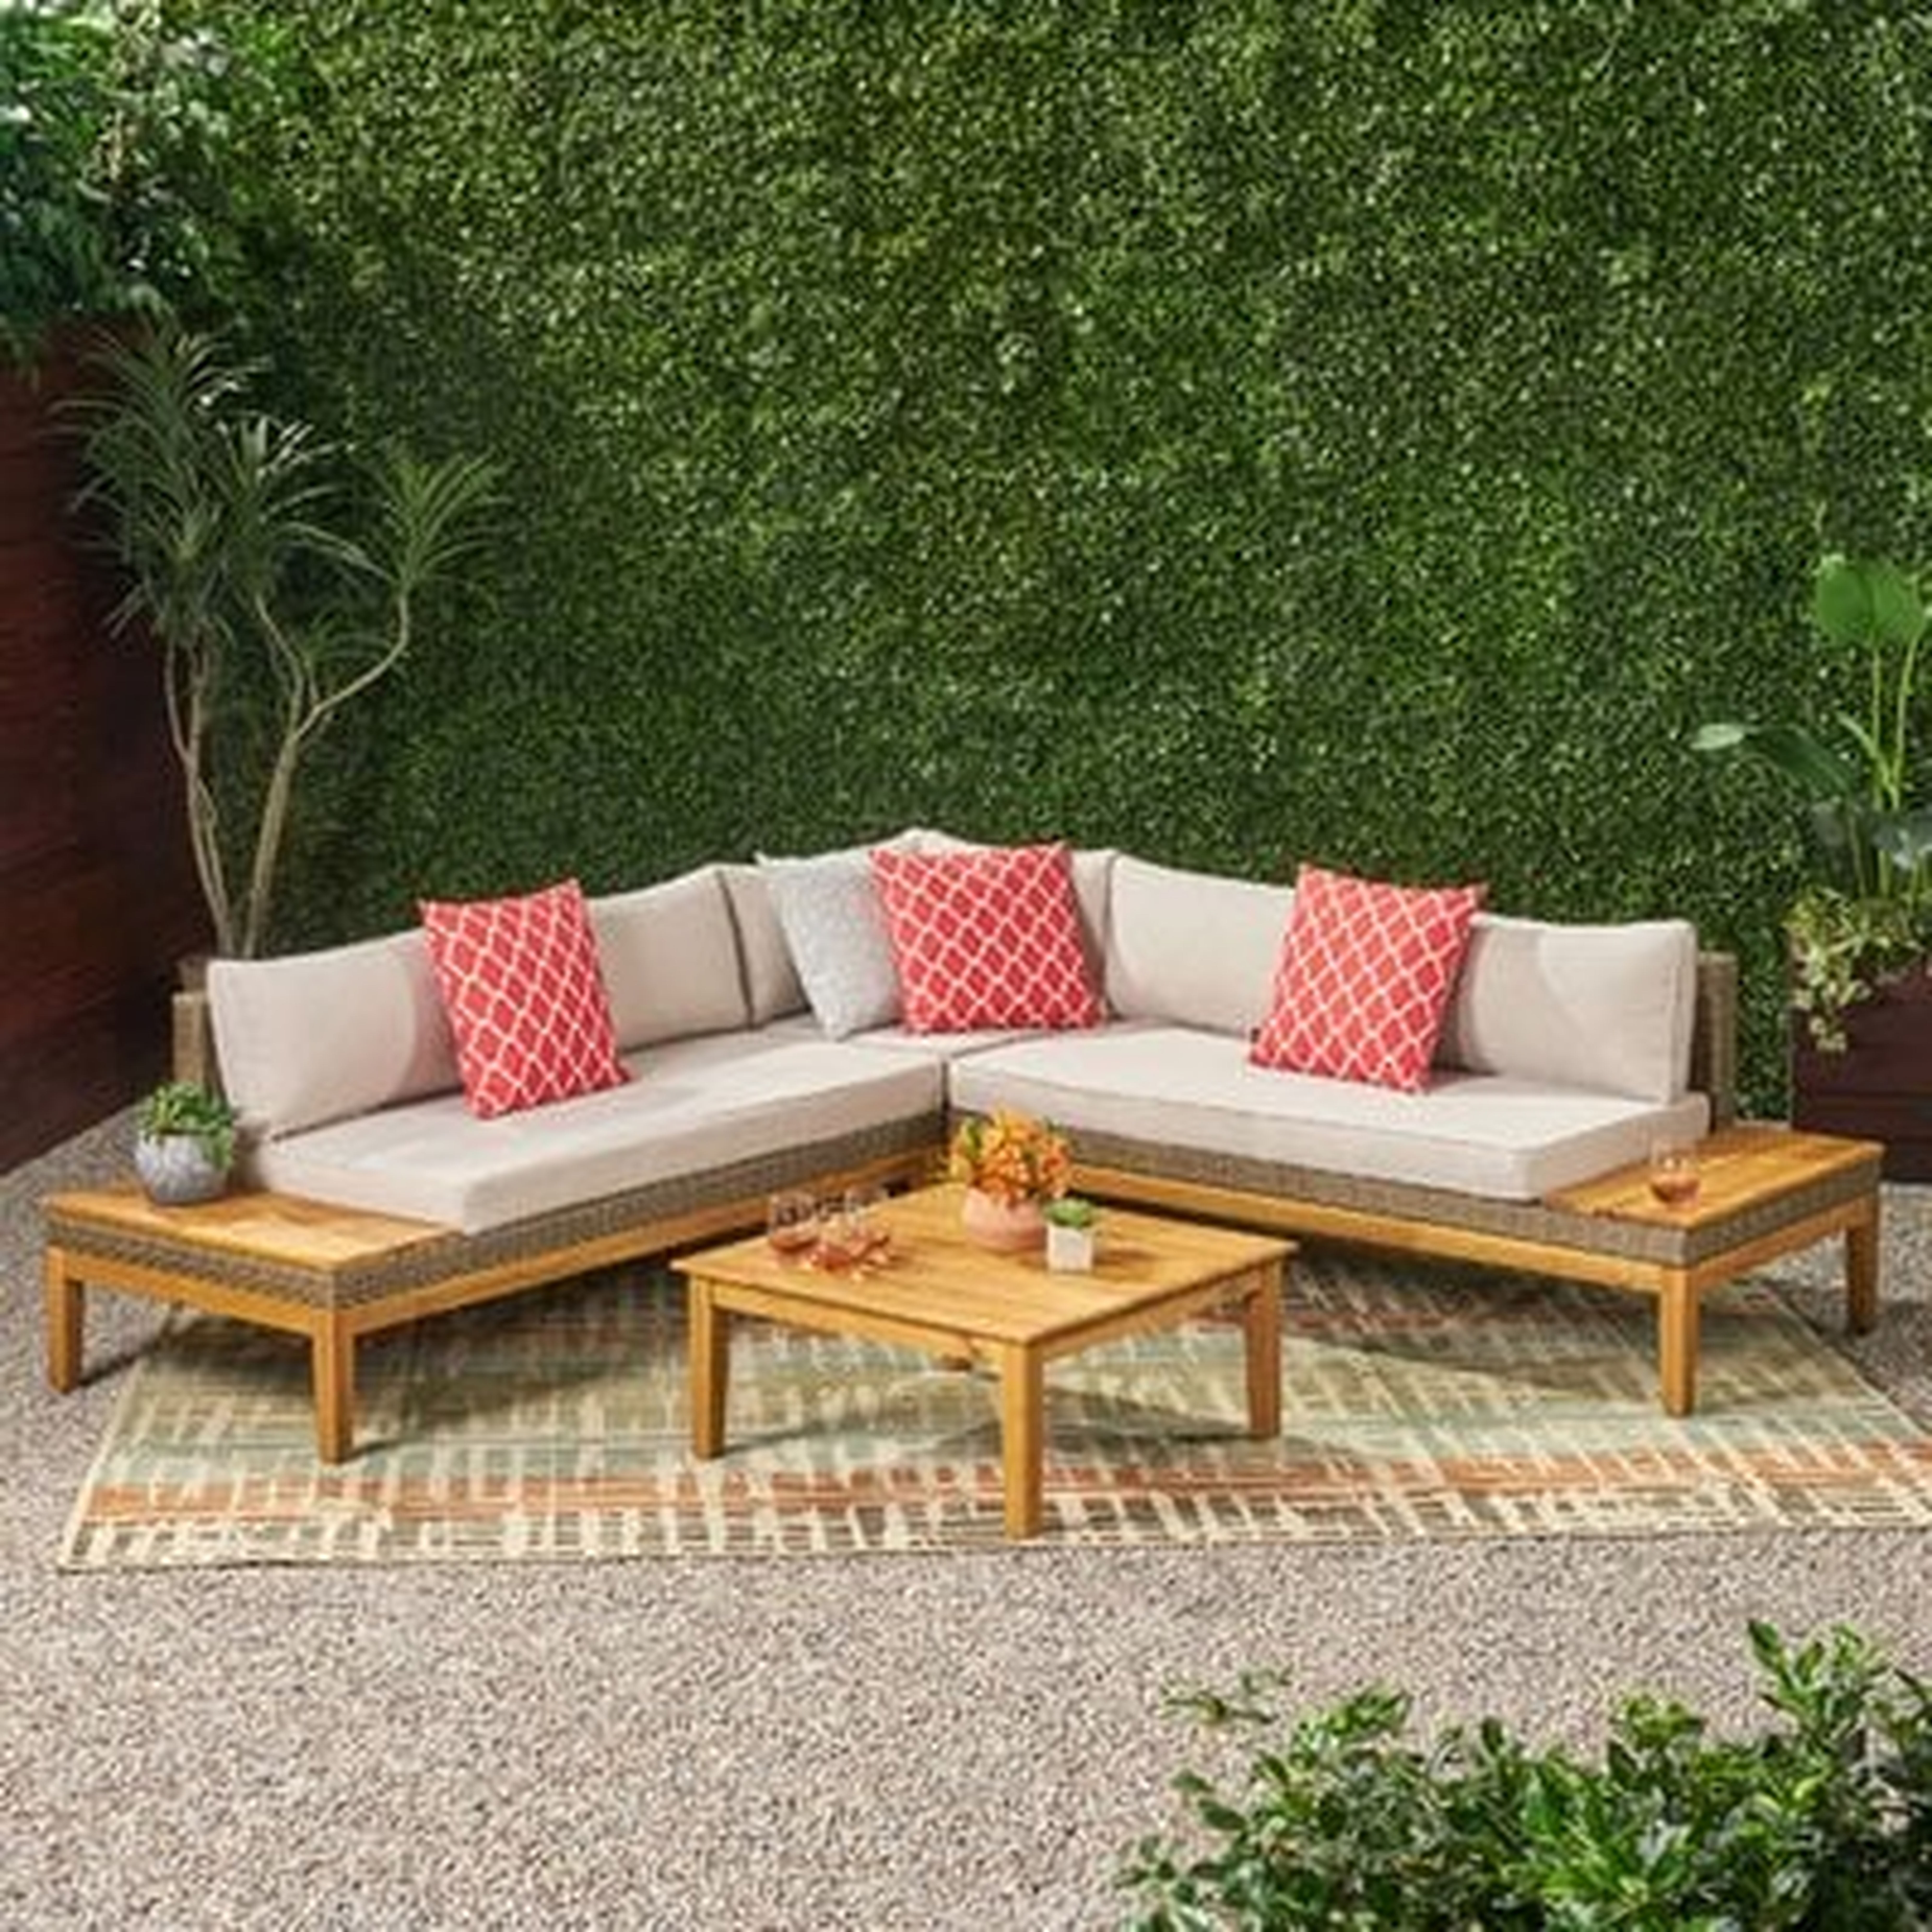 4 Piece Sectional Seating Group with Cushions - Wayfair